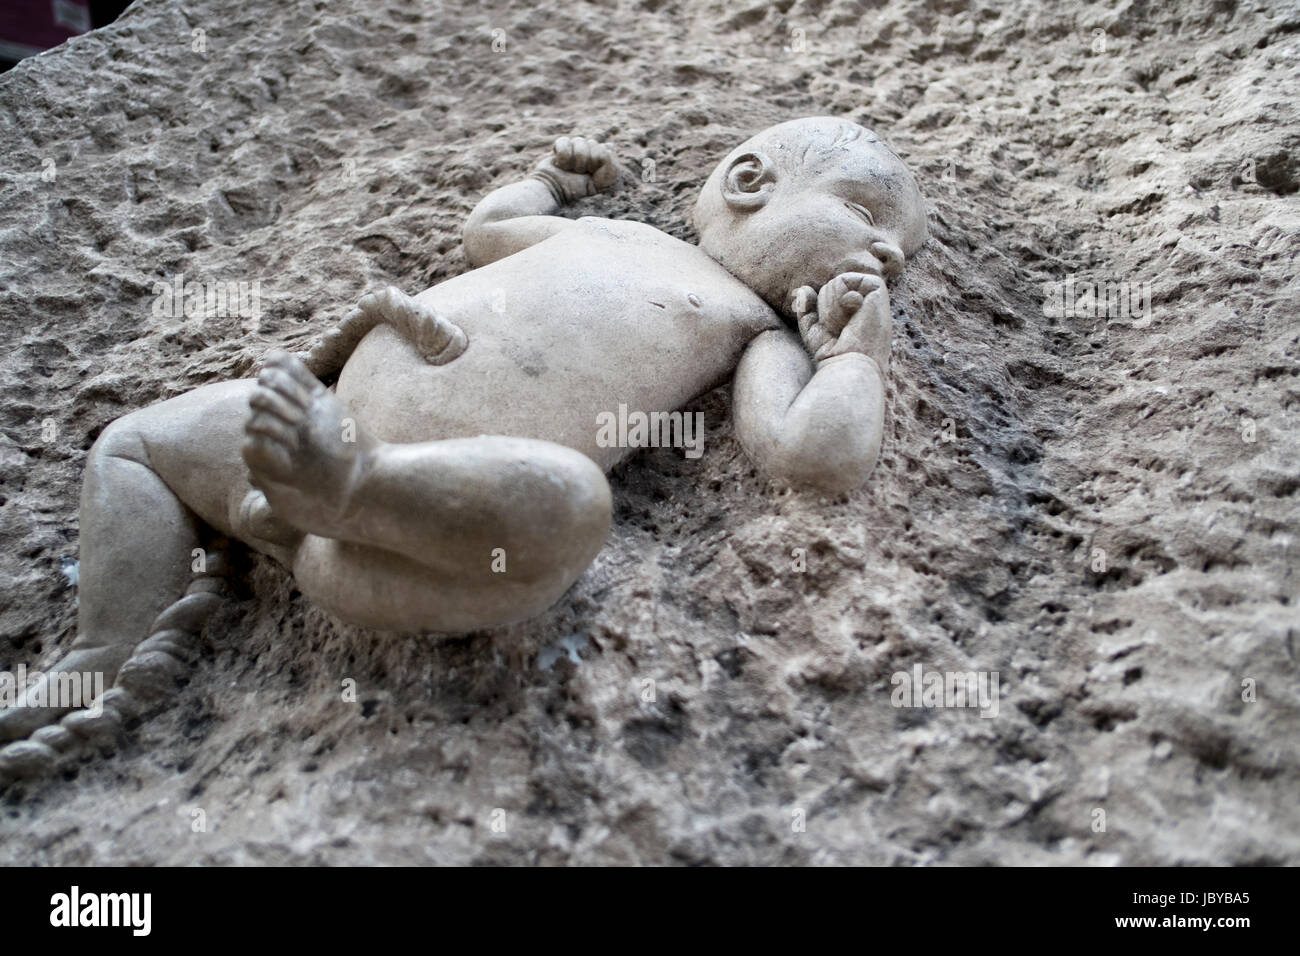 Newborn baby sculpture in stone at St Martin in the Fields church at Trafalgar Square, London Stock Photo